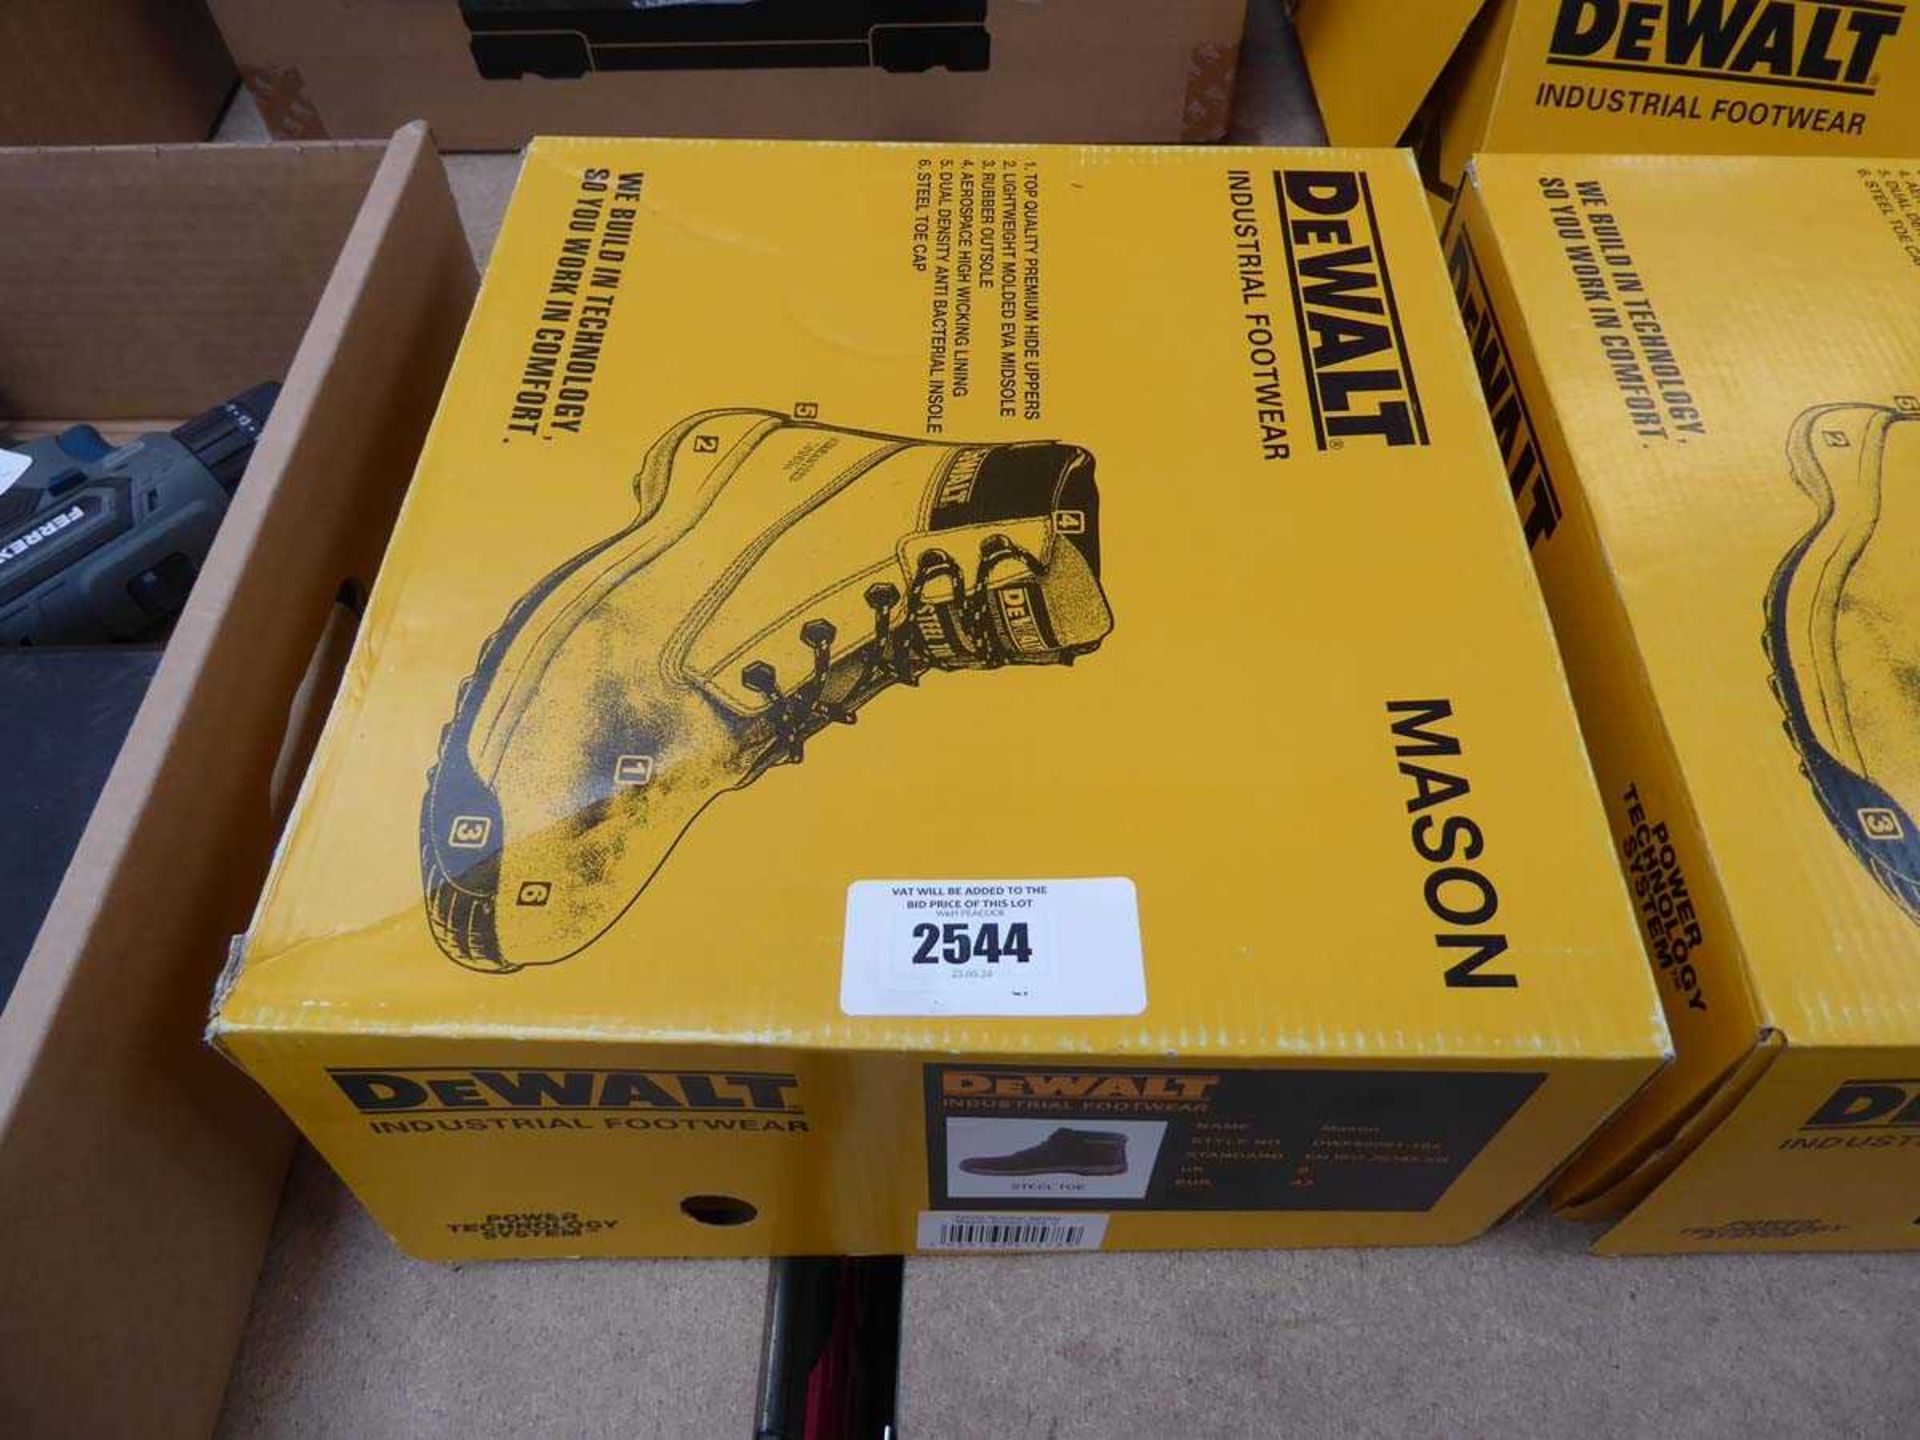 +VAT Boxed pair of DeWalt Mason steel toe safety boots in brown (size 9)